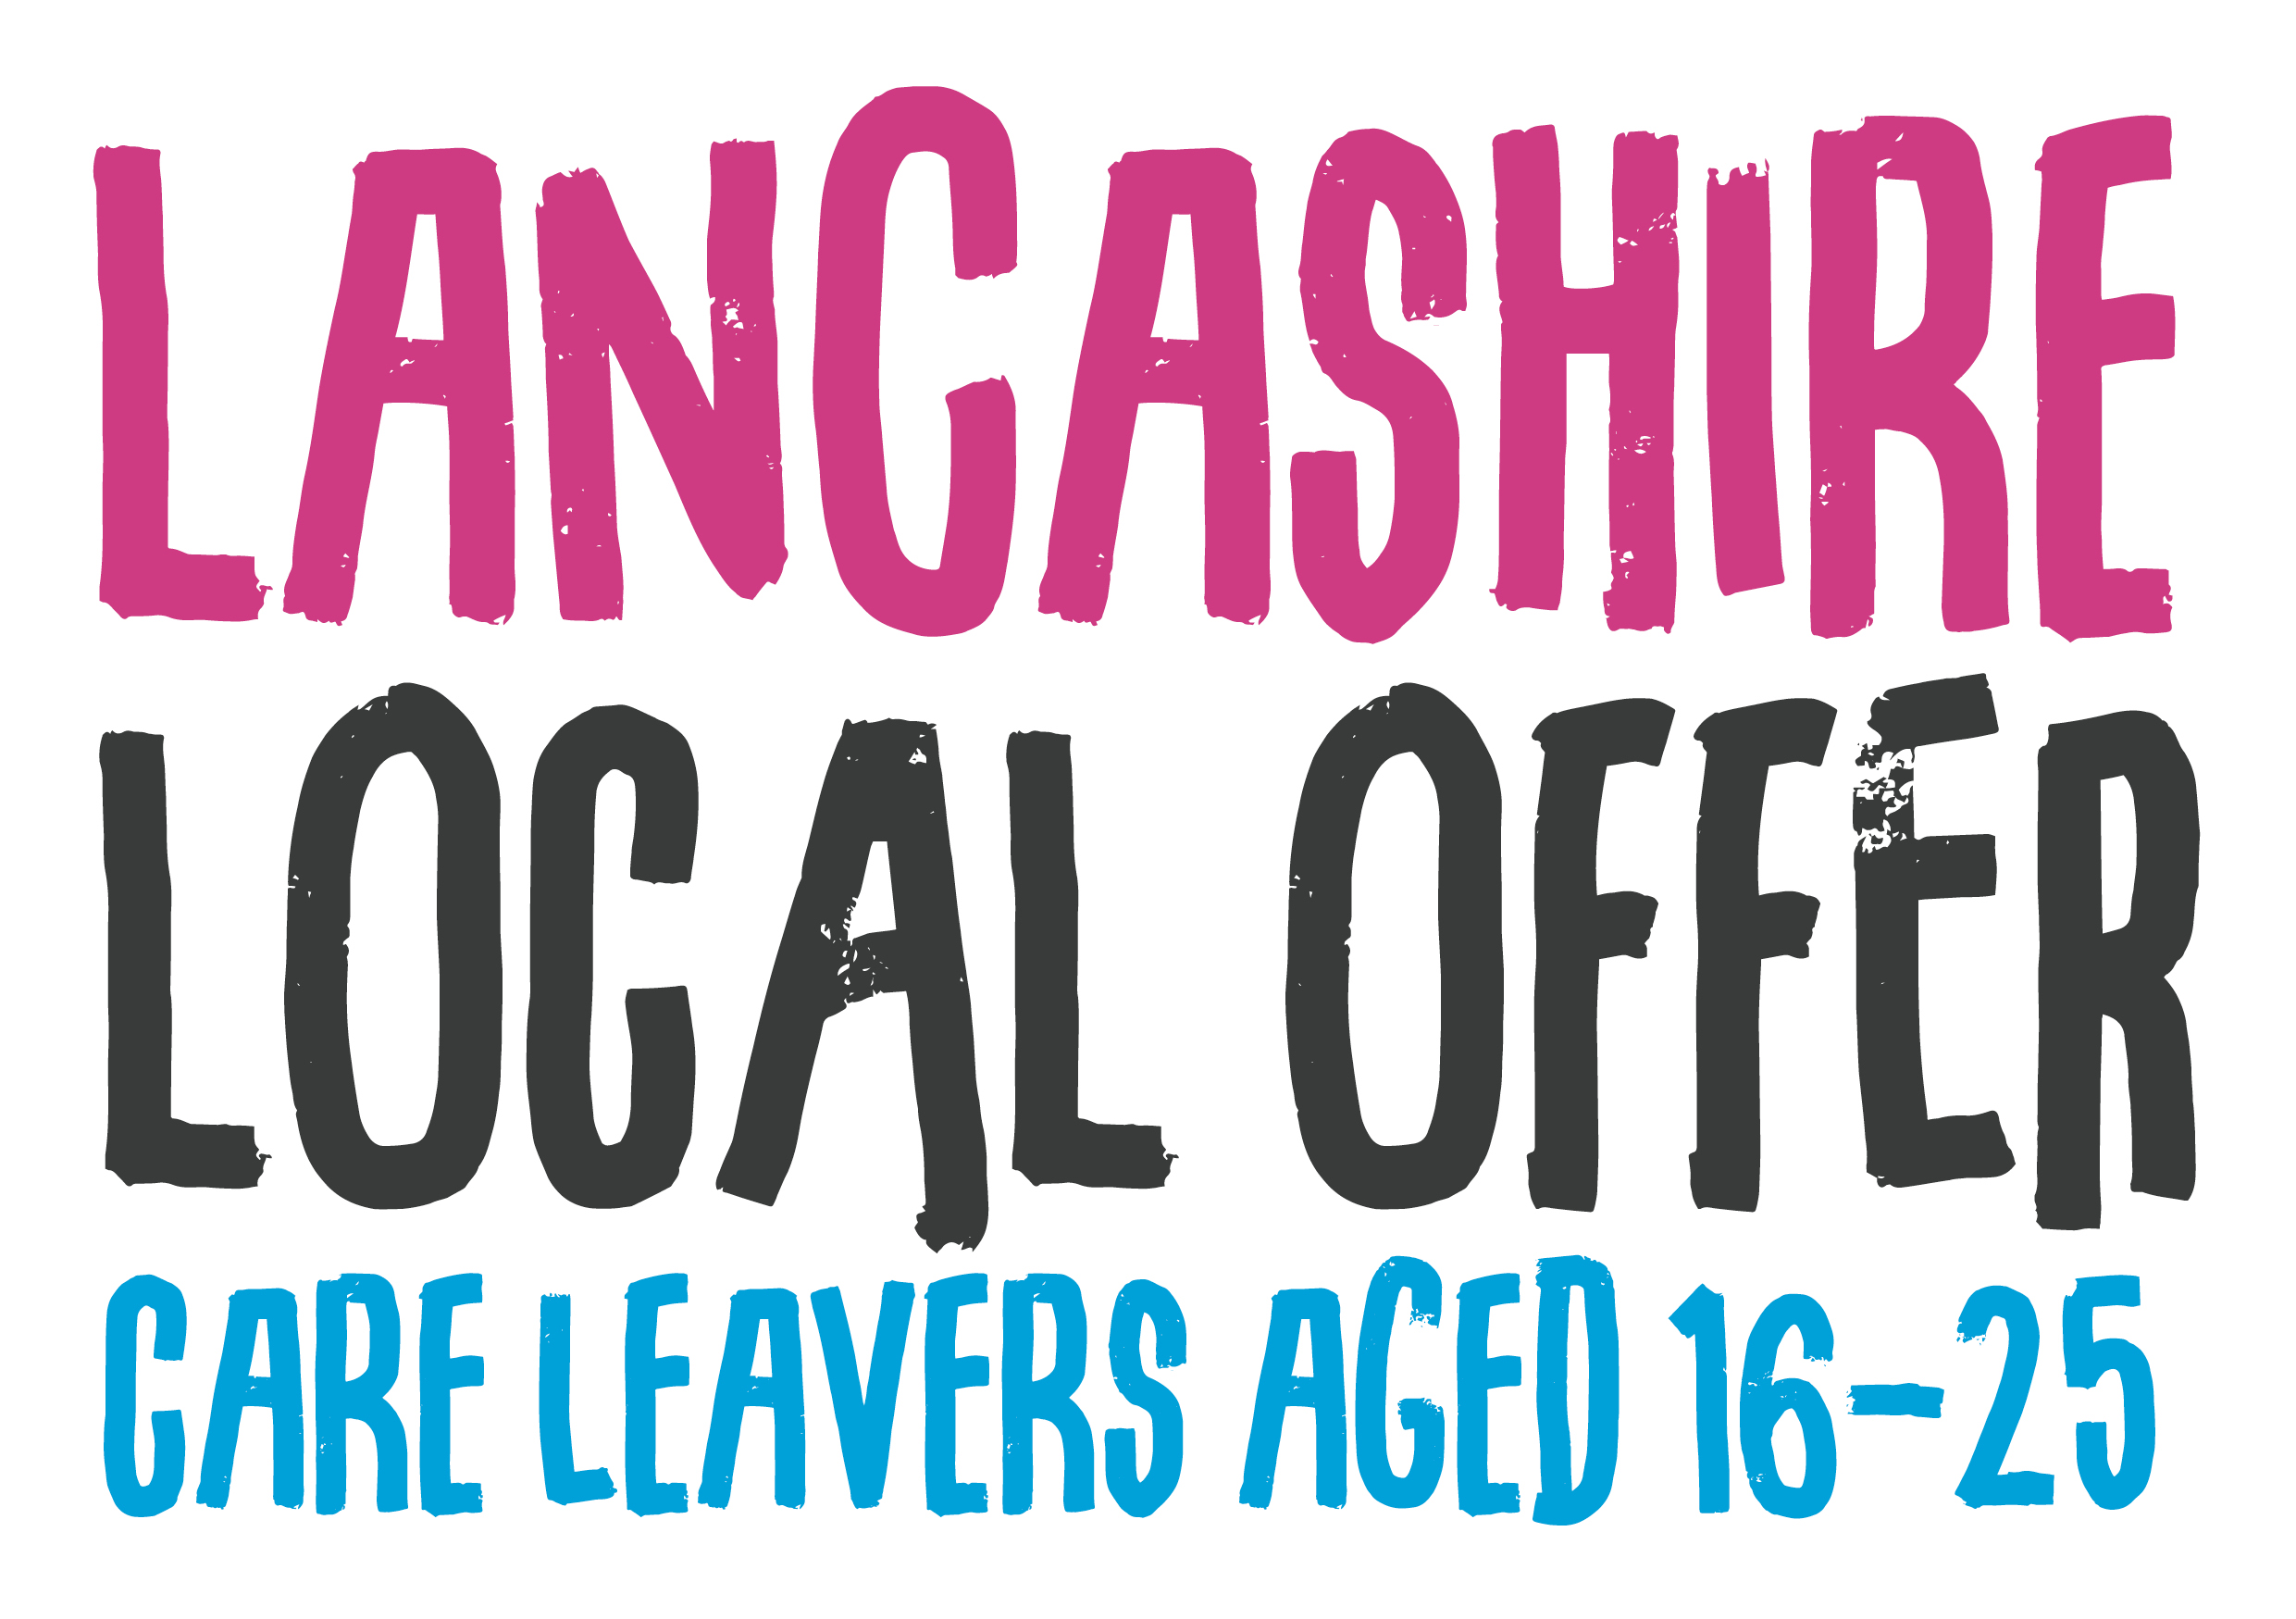 Care leavers local offer